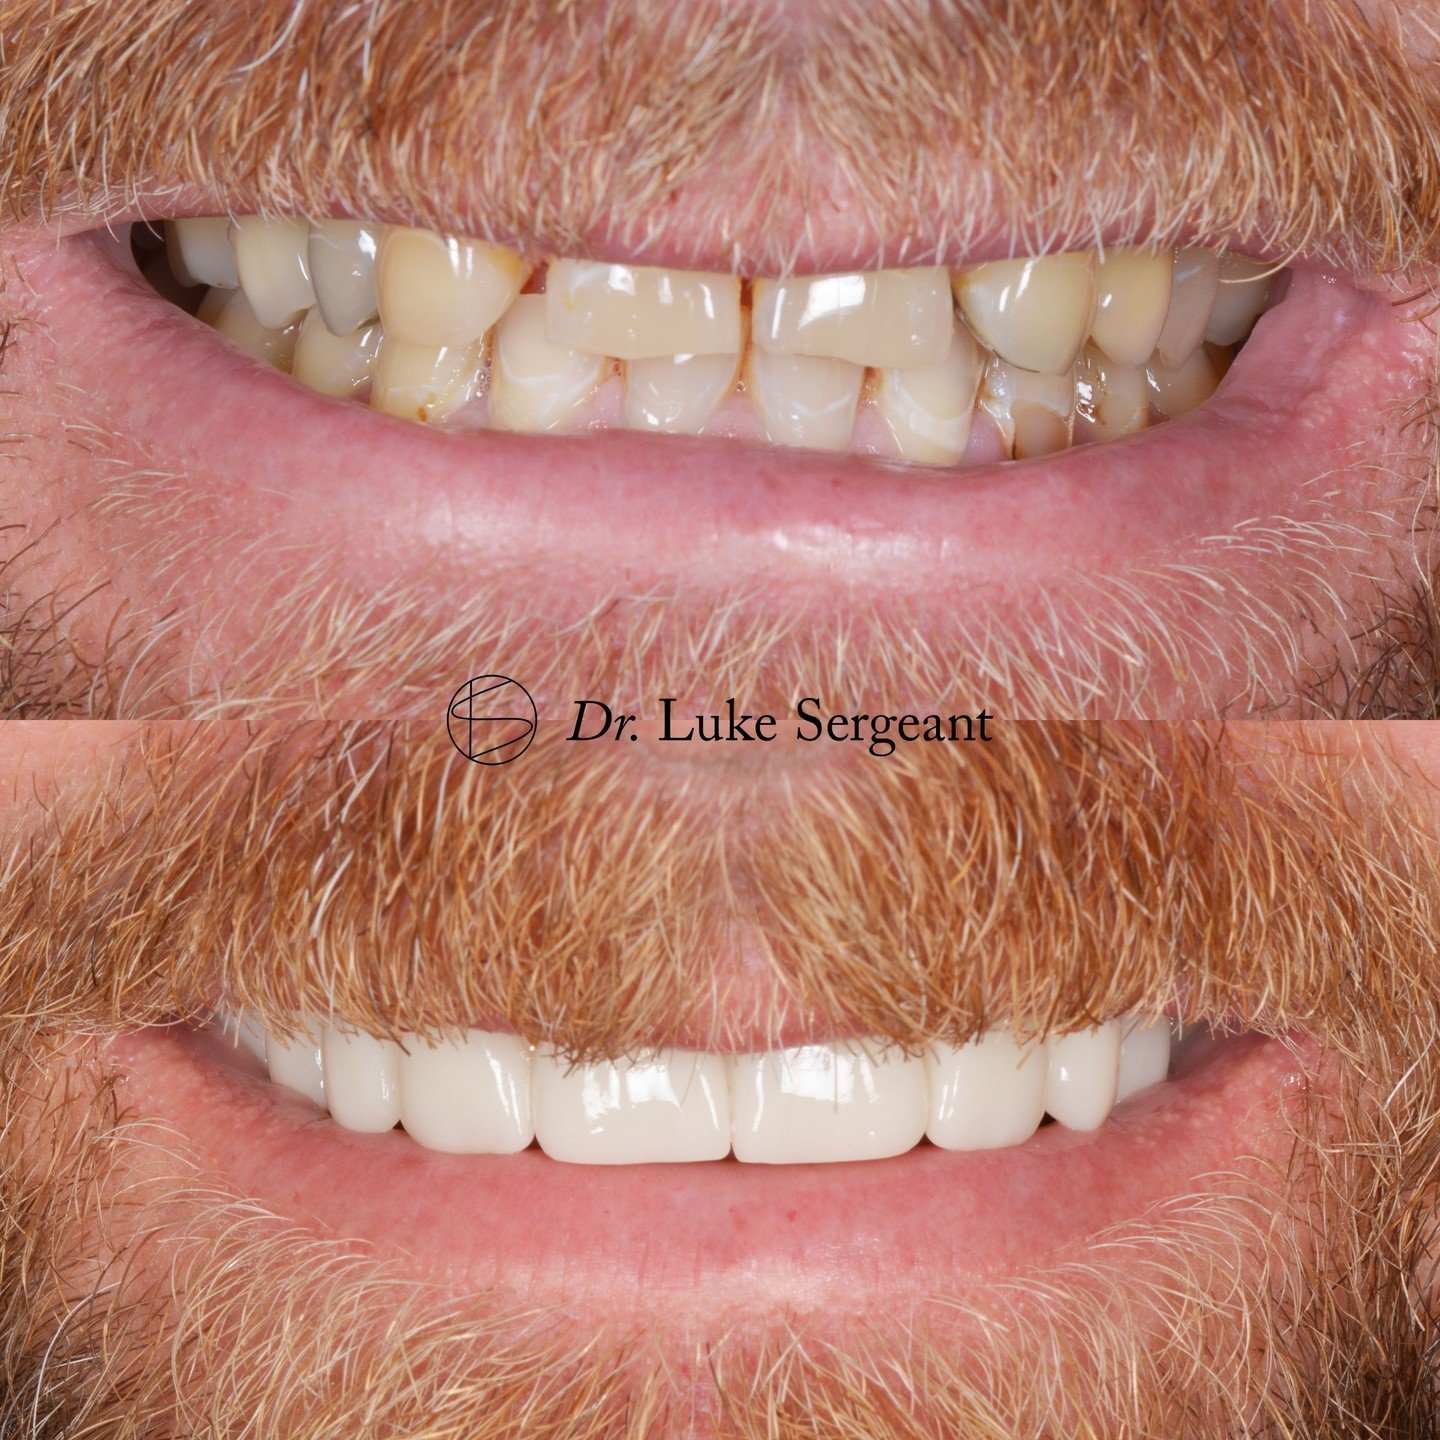 This amazing transformation was achieved using a combination of Emax veneers, and two Emax bridges, to replace missing teeth. Following tooth whitening and a smile design, to ensure the best symmetry, function and aesthetic possible. ✨

#emaxveneers 